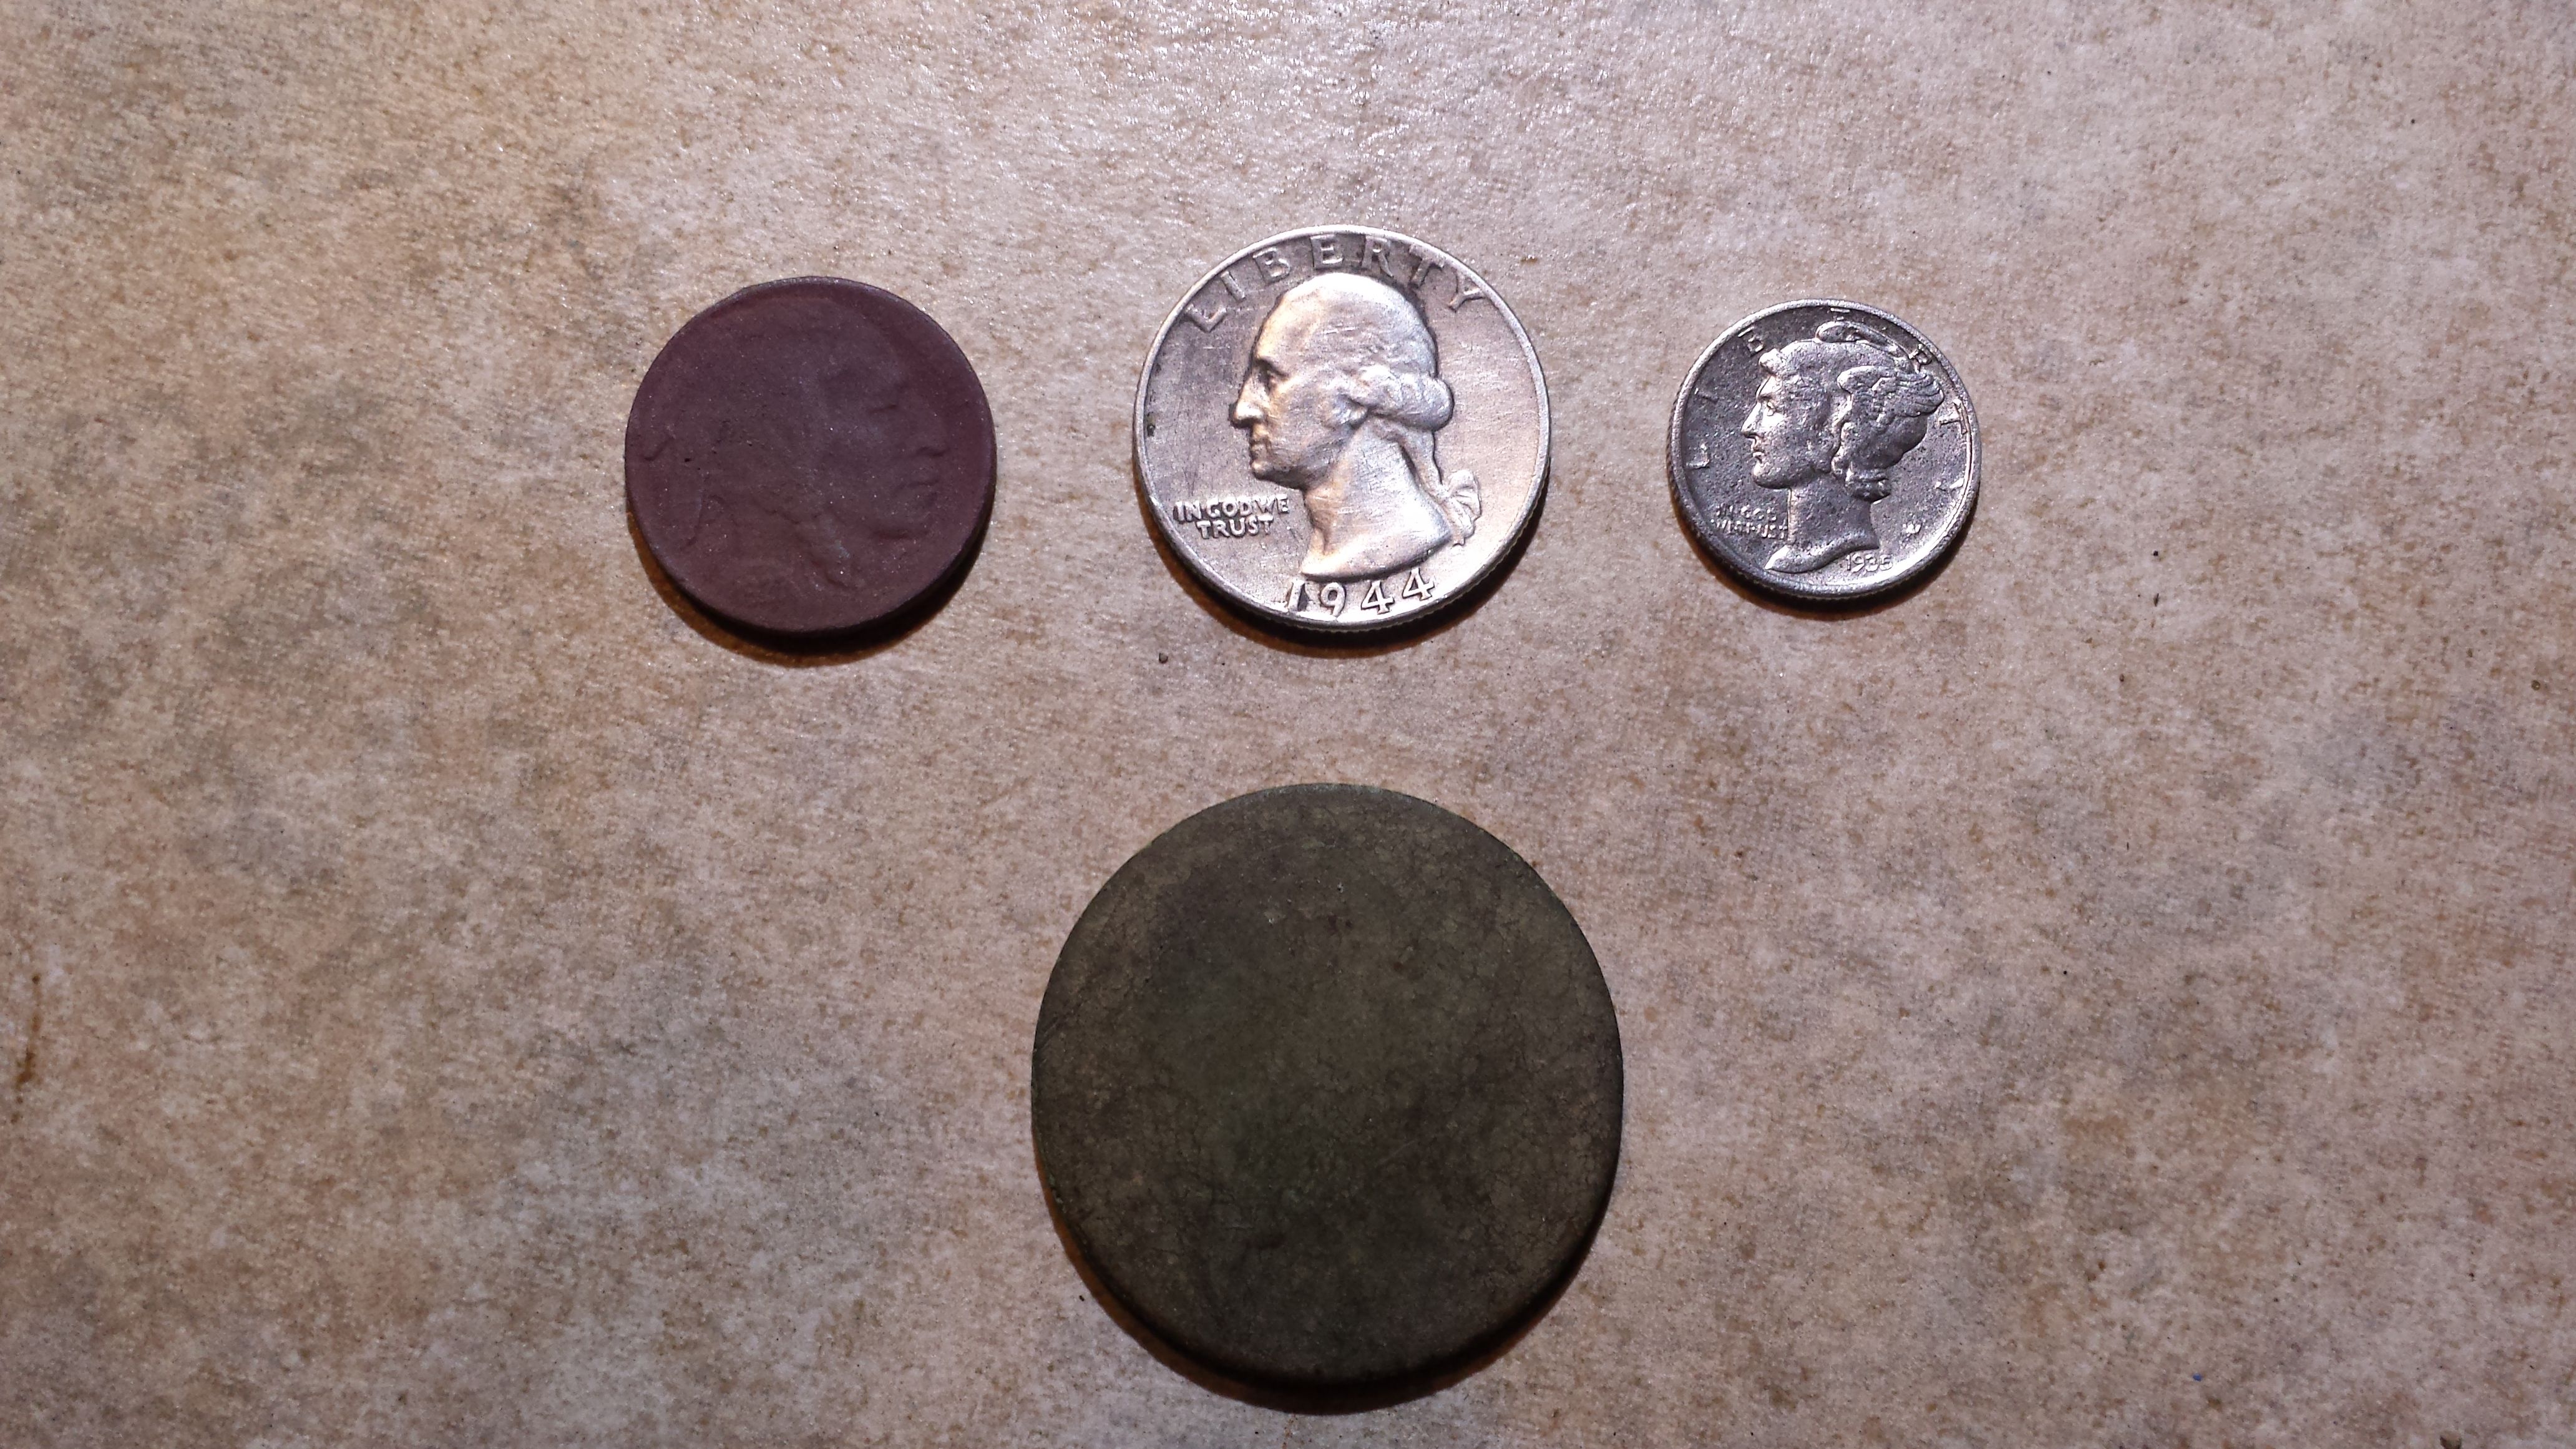 20151127 182020  Notables from curb strip by cemetery.  1927 Buffalo, 1944 Quarter, 1935 Merc, &  Bronze disk